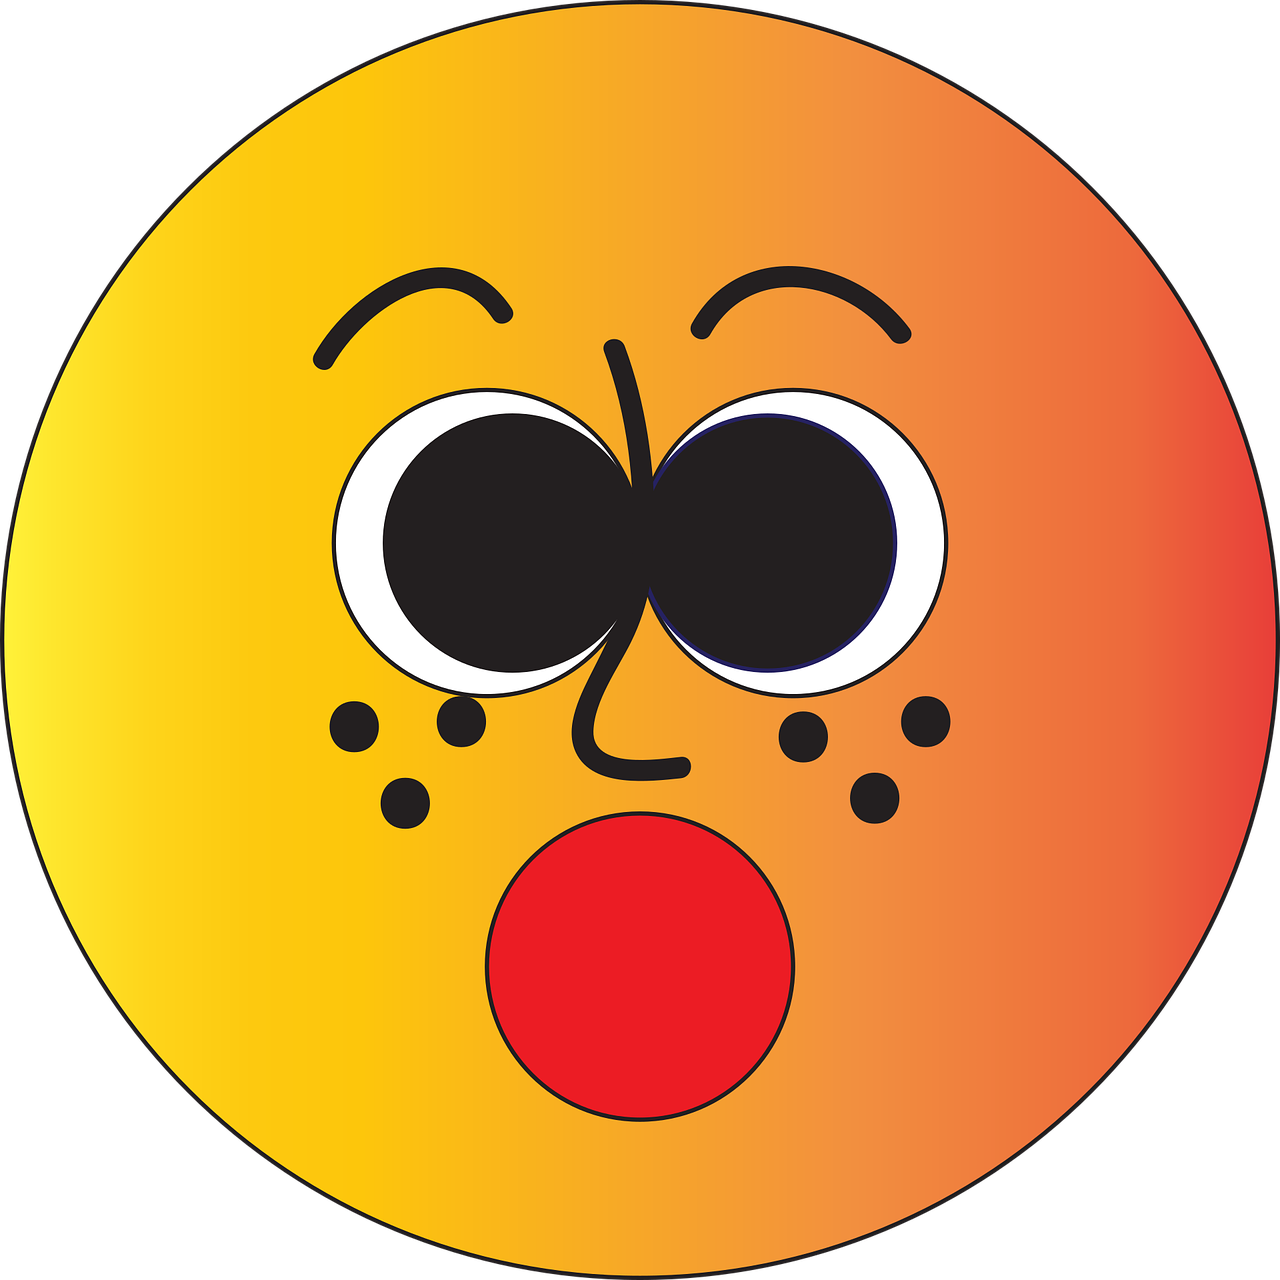 A Yellow And Orange Face With Black Dots And Red Cheeks